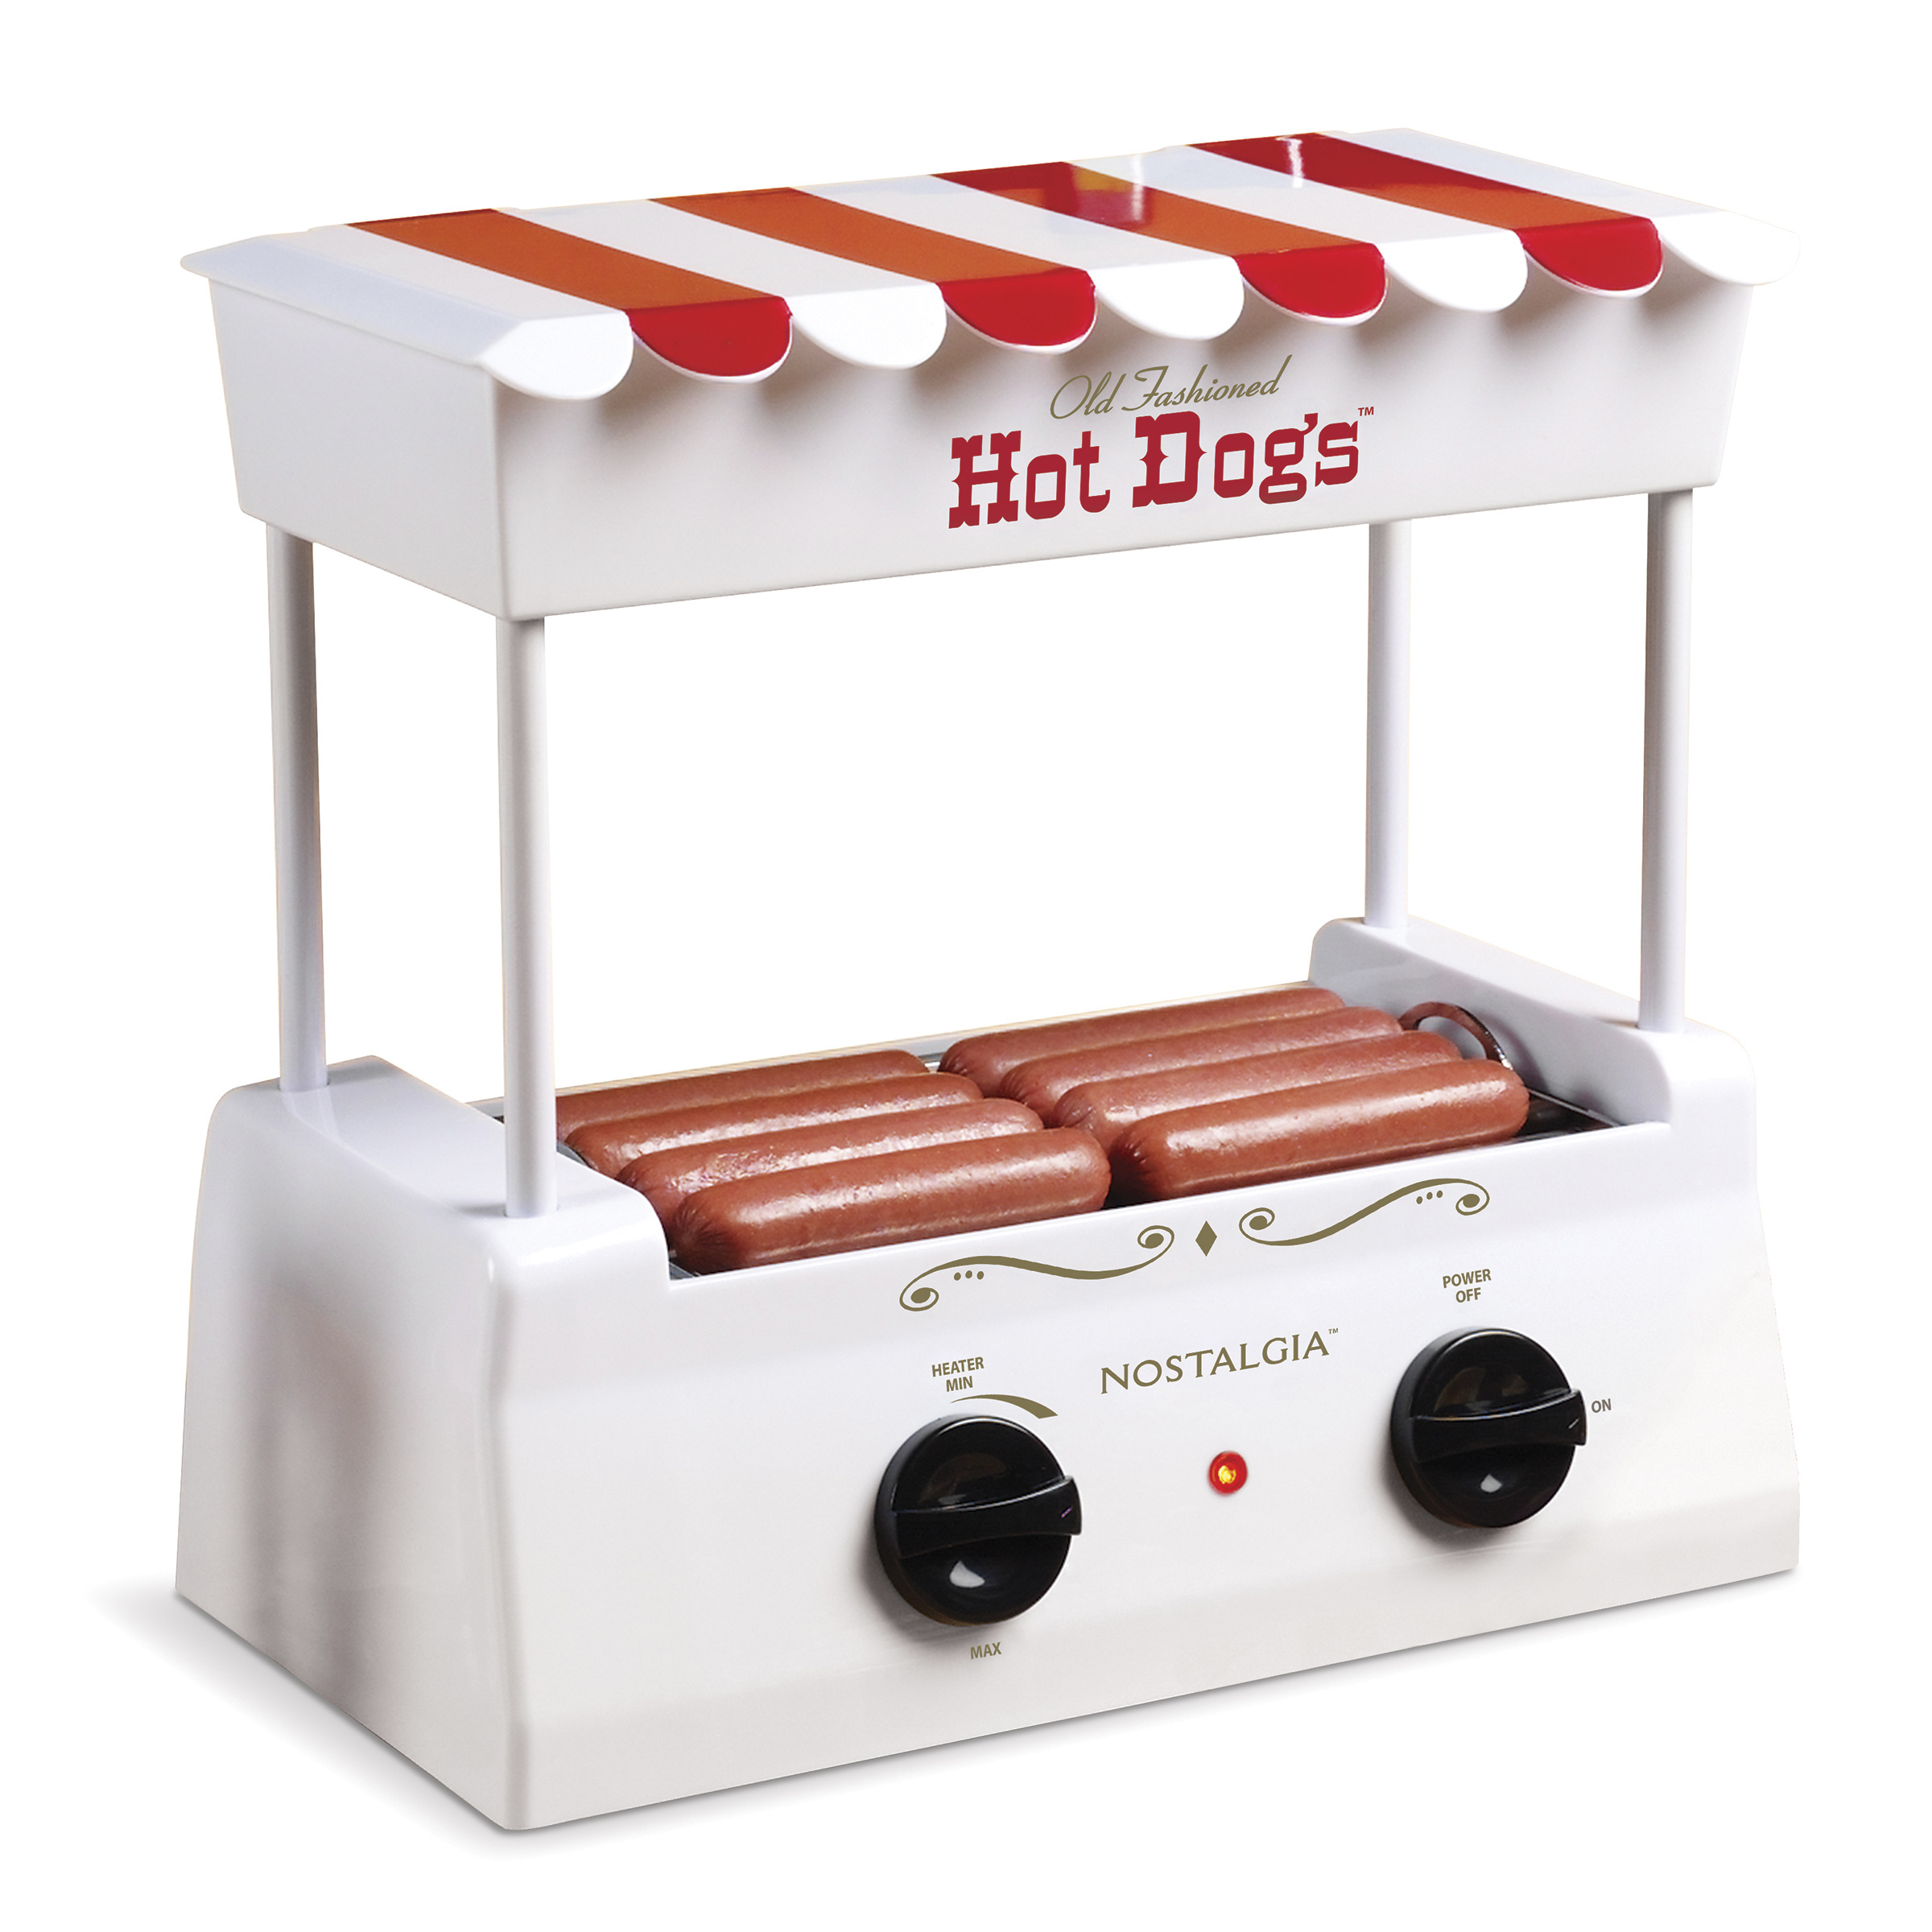 Nostalgia HDR565 Countertop Hot Dog Roller and Warmer, 8 Regular Sized or 4 Foot Long Hot Dogs and 6 Bun Capacity – White - image 1 of 4